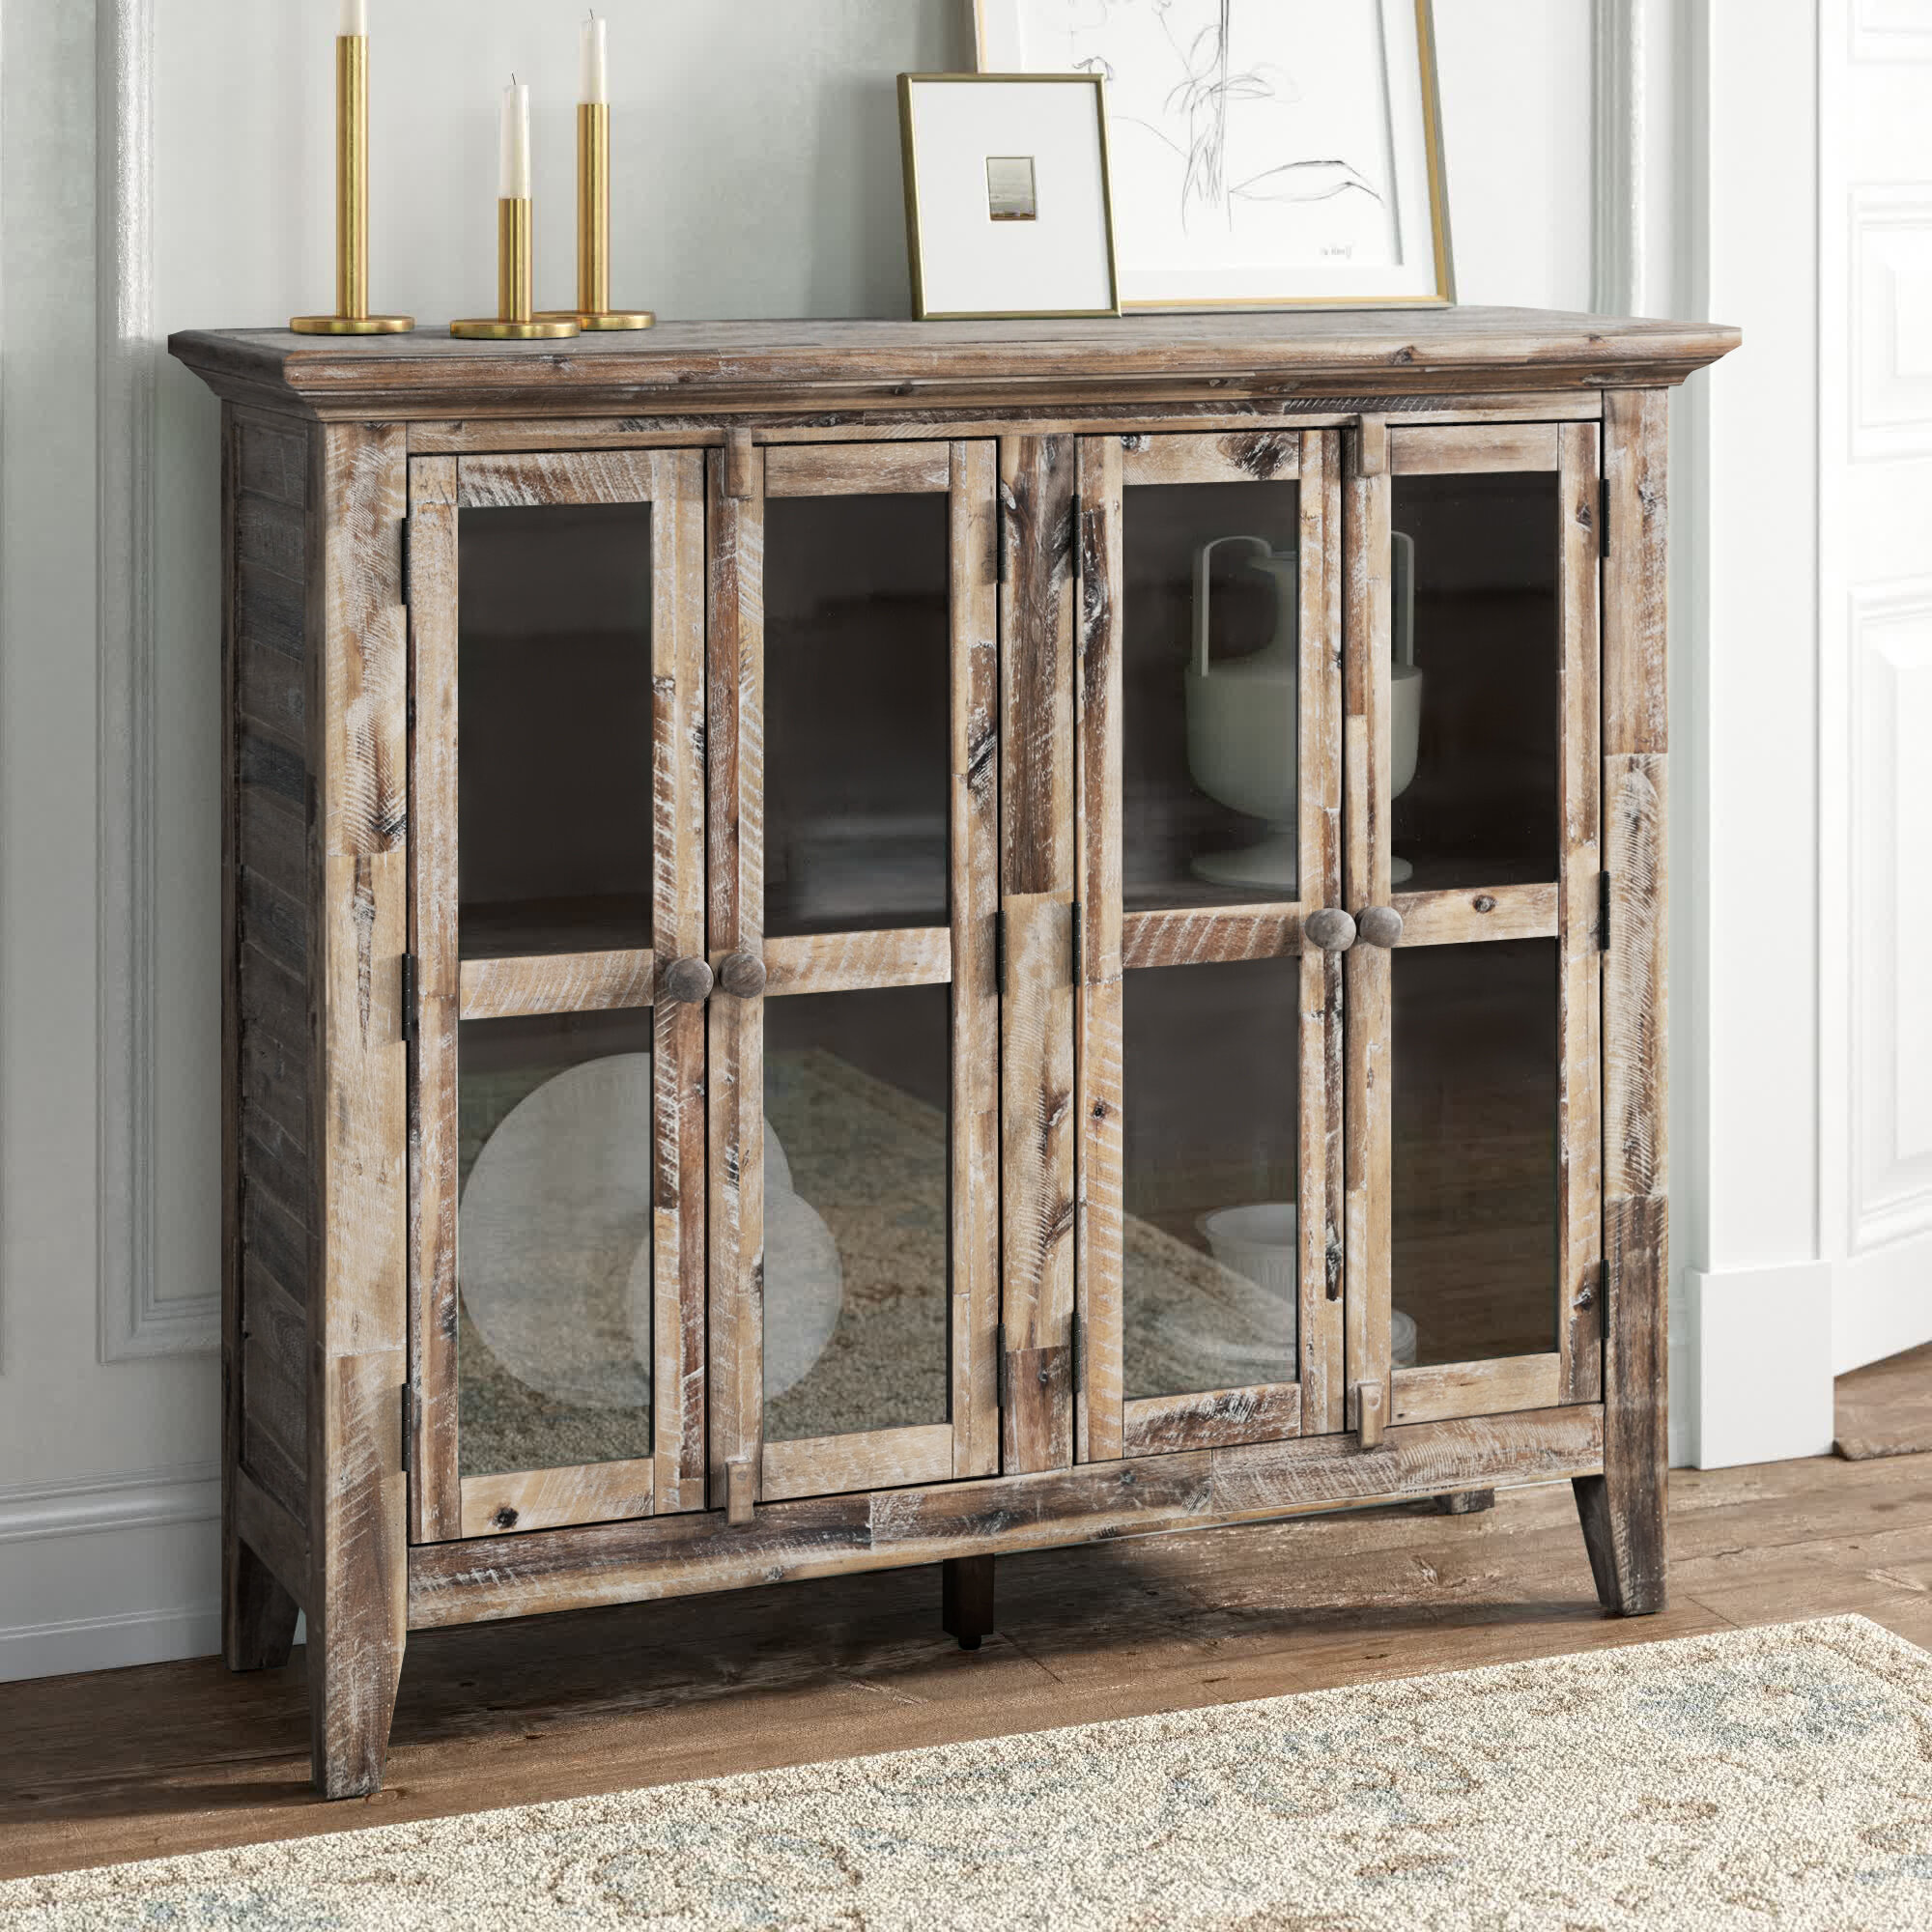 Acacia Cabinets & Chests You'll Love